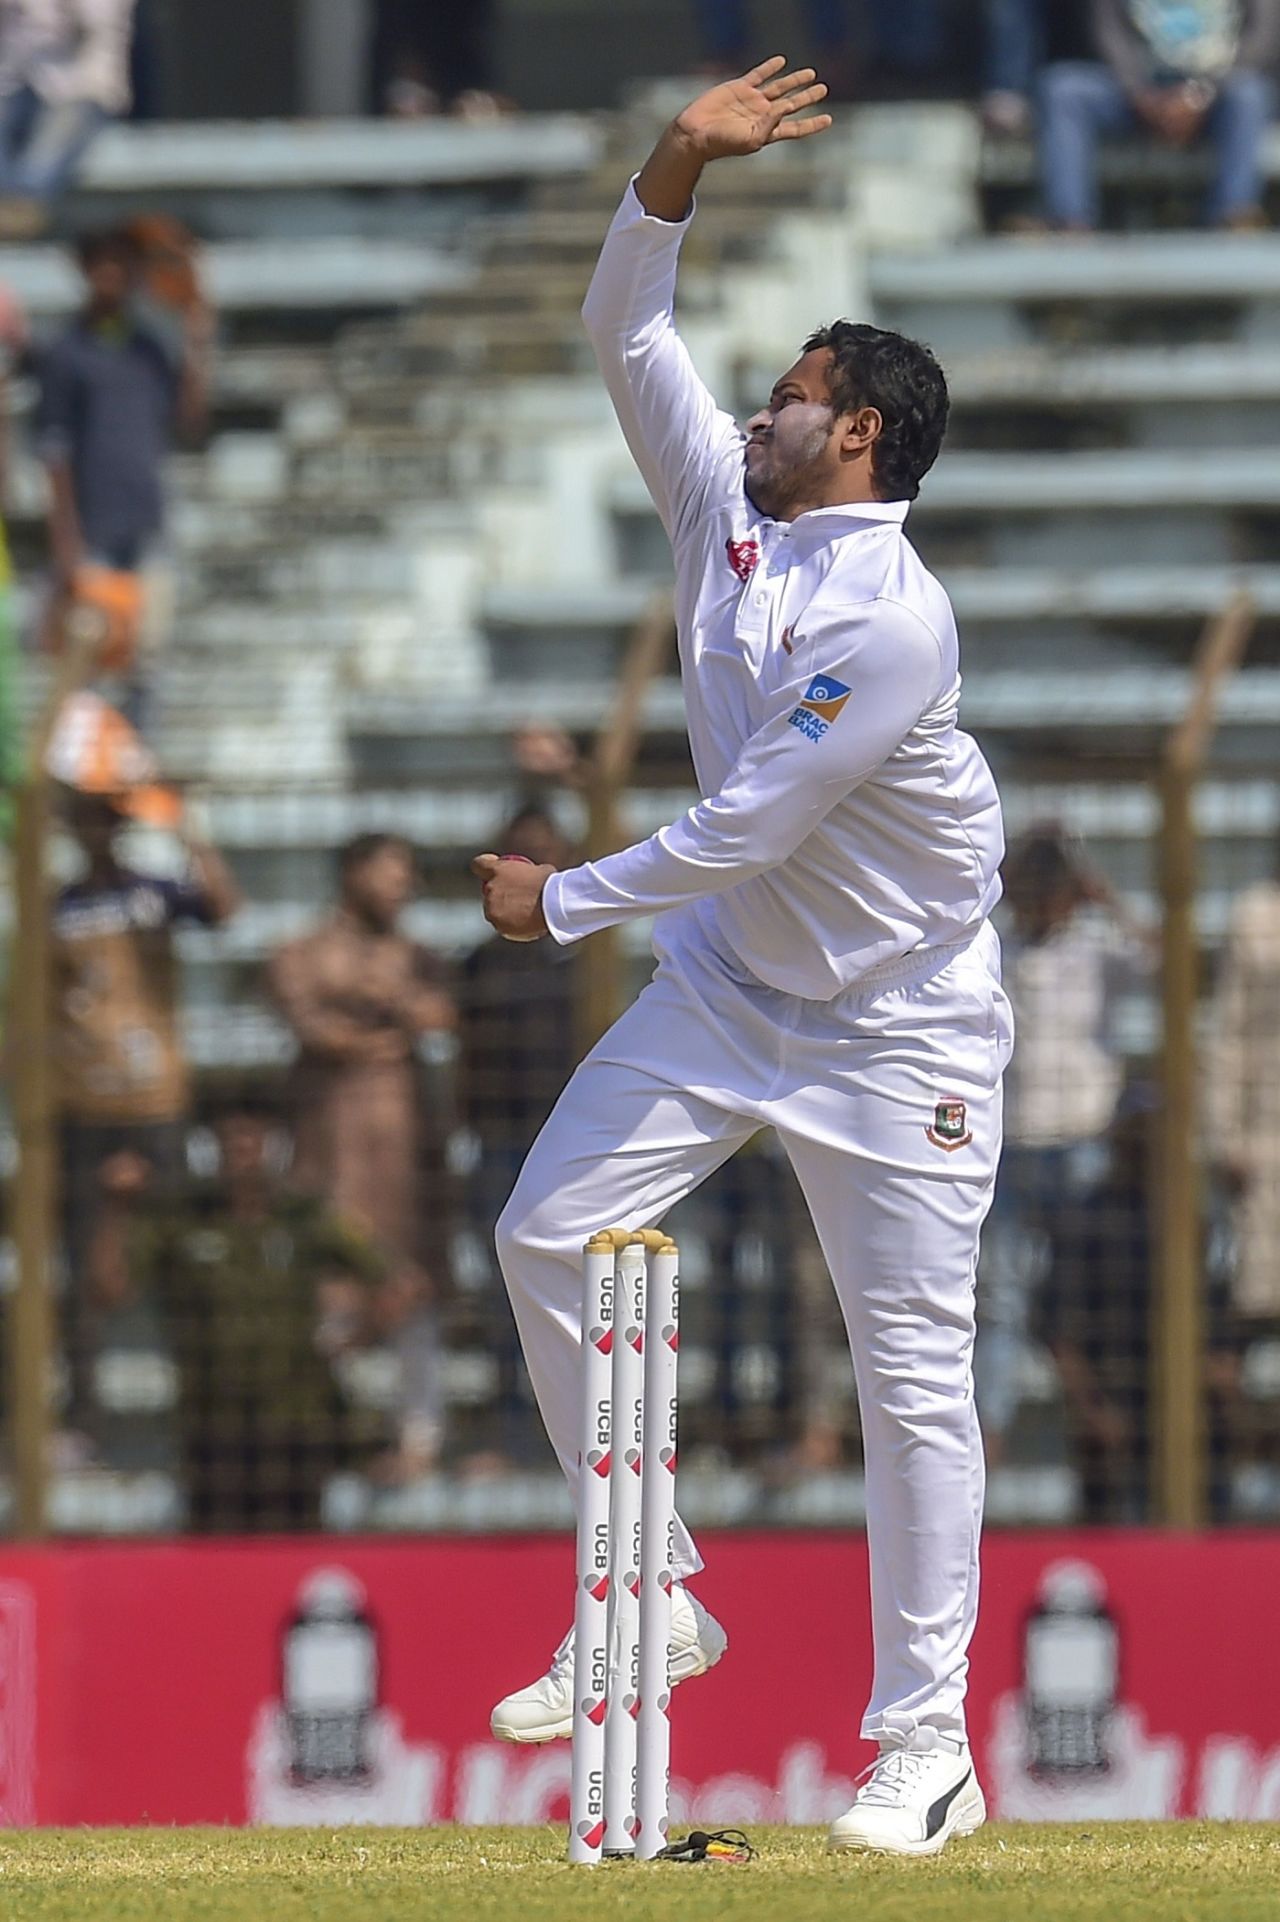 Shakib Al Hasan struck twice at the start to set the tone for Bangladesh, Bangladesh v West Indies, 1st Test, Chattogram, 3rd day